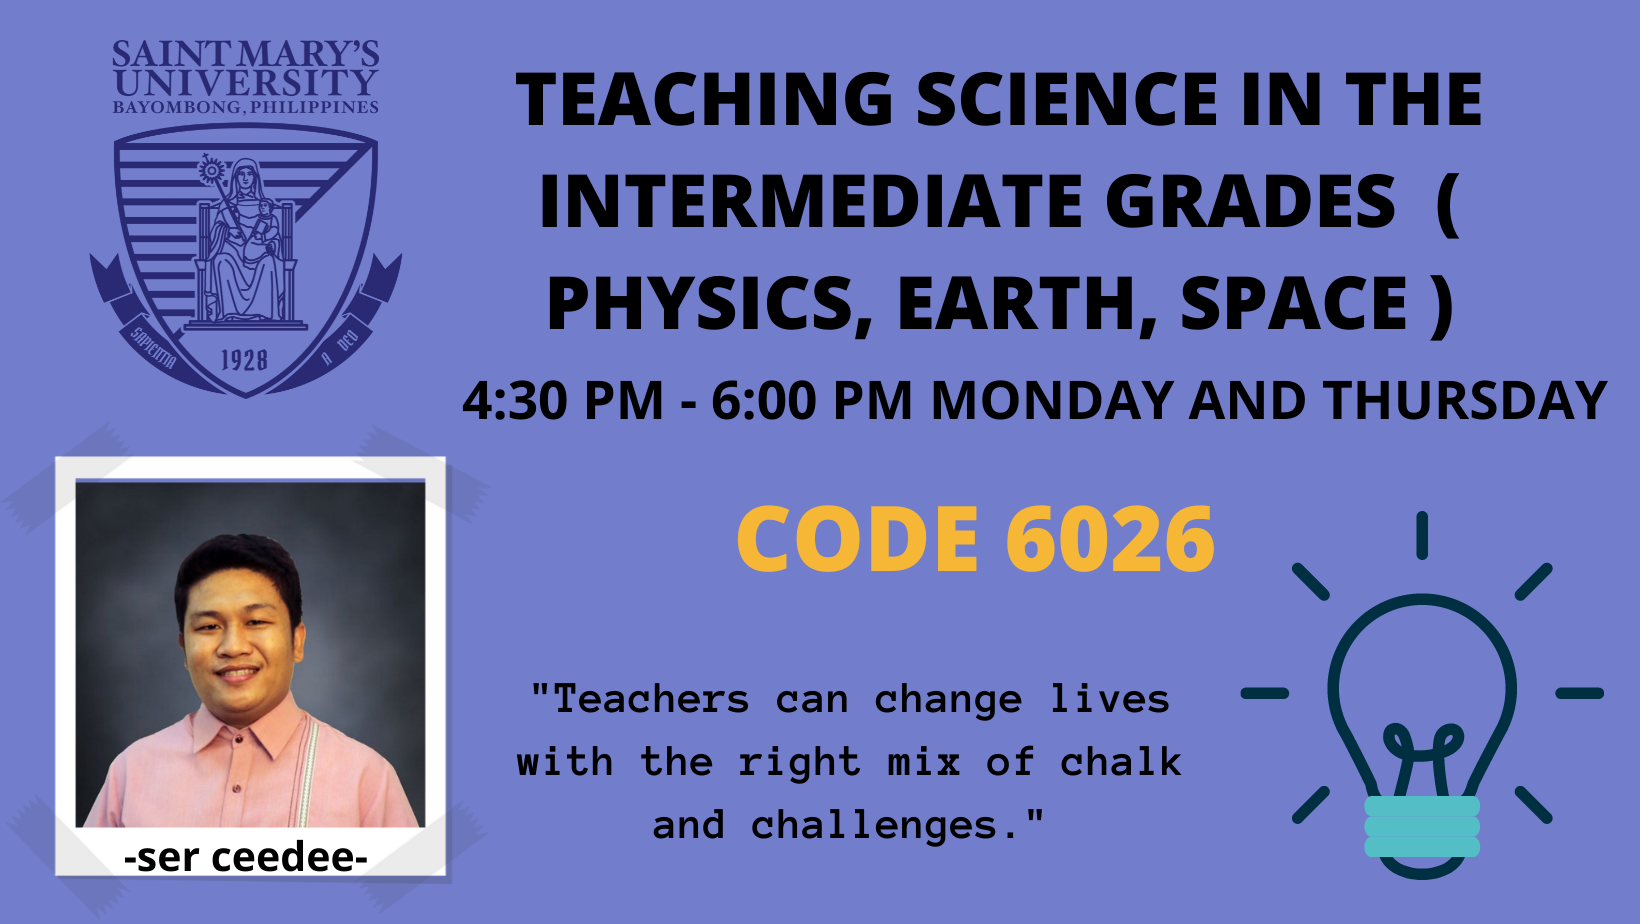 Teaching Science in the Intermediate Grades (Physics, Earth, Space) 